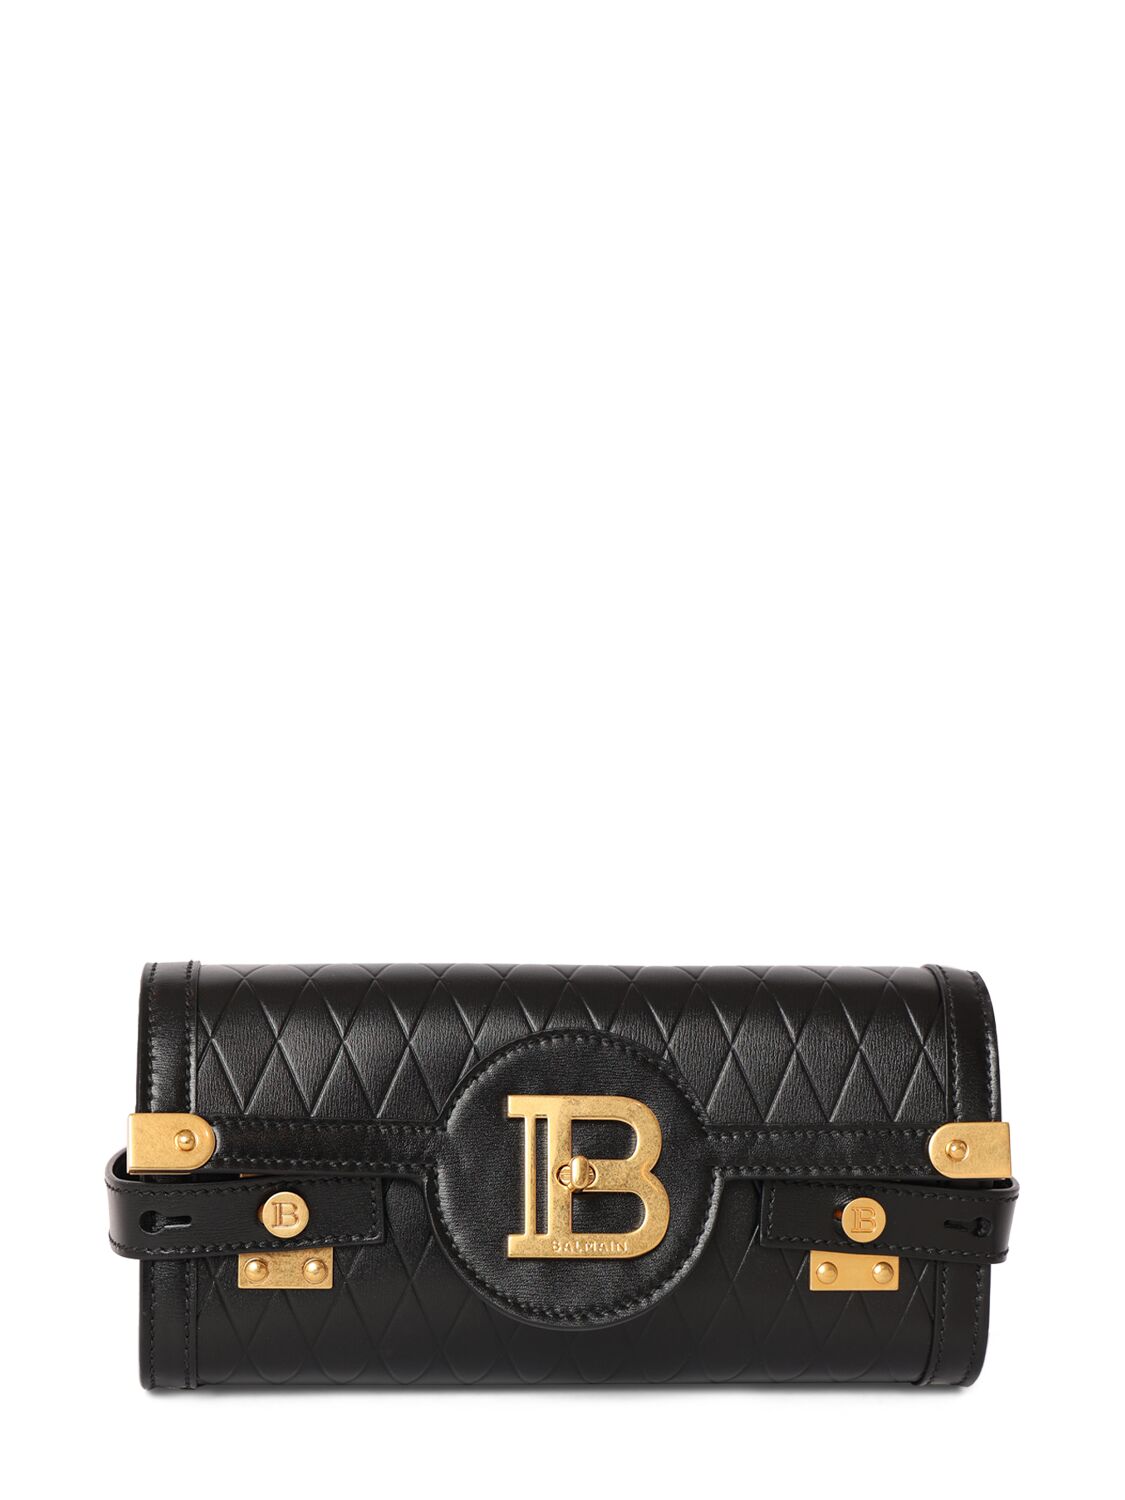 B-buzz 23 Embossed Leather Clutch